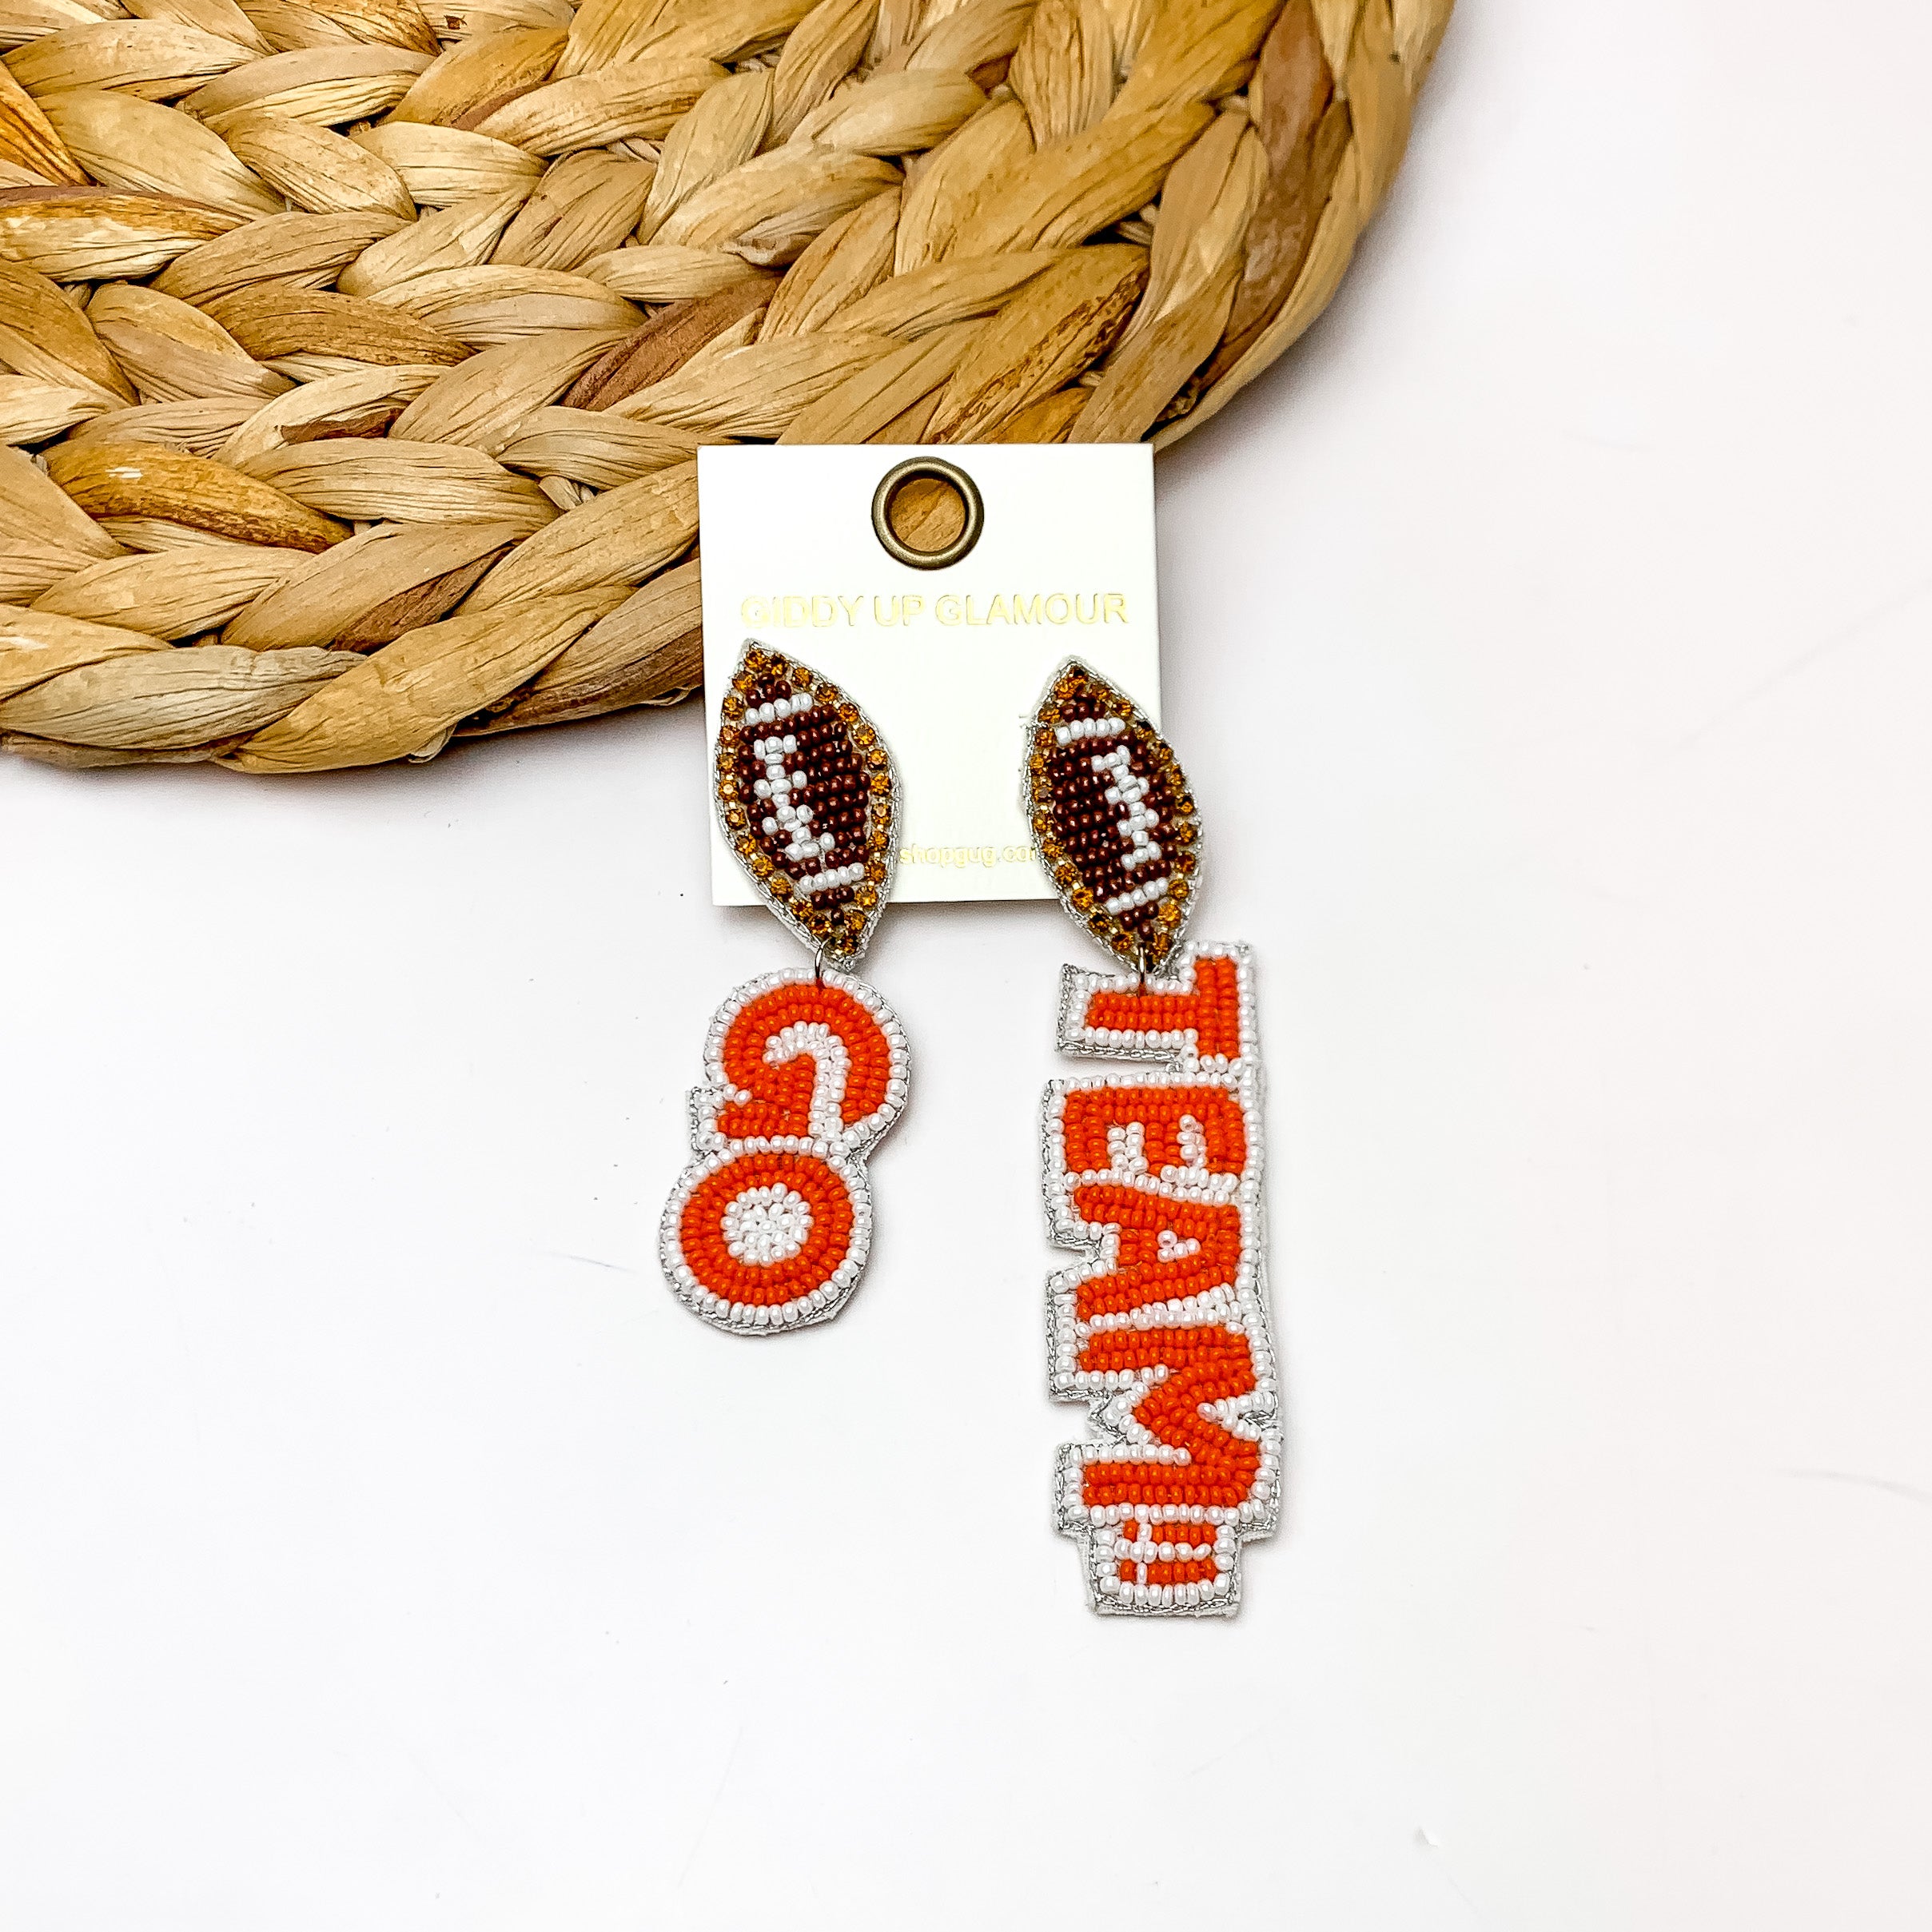 " Go Team!!" Beaded Earrings With Football Posts in Orange and White. These earrings are laying against a woven piece with a white background behind it.